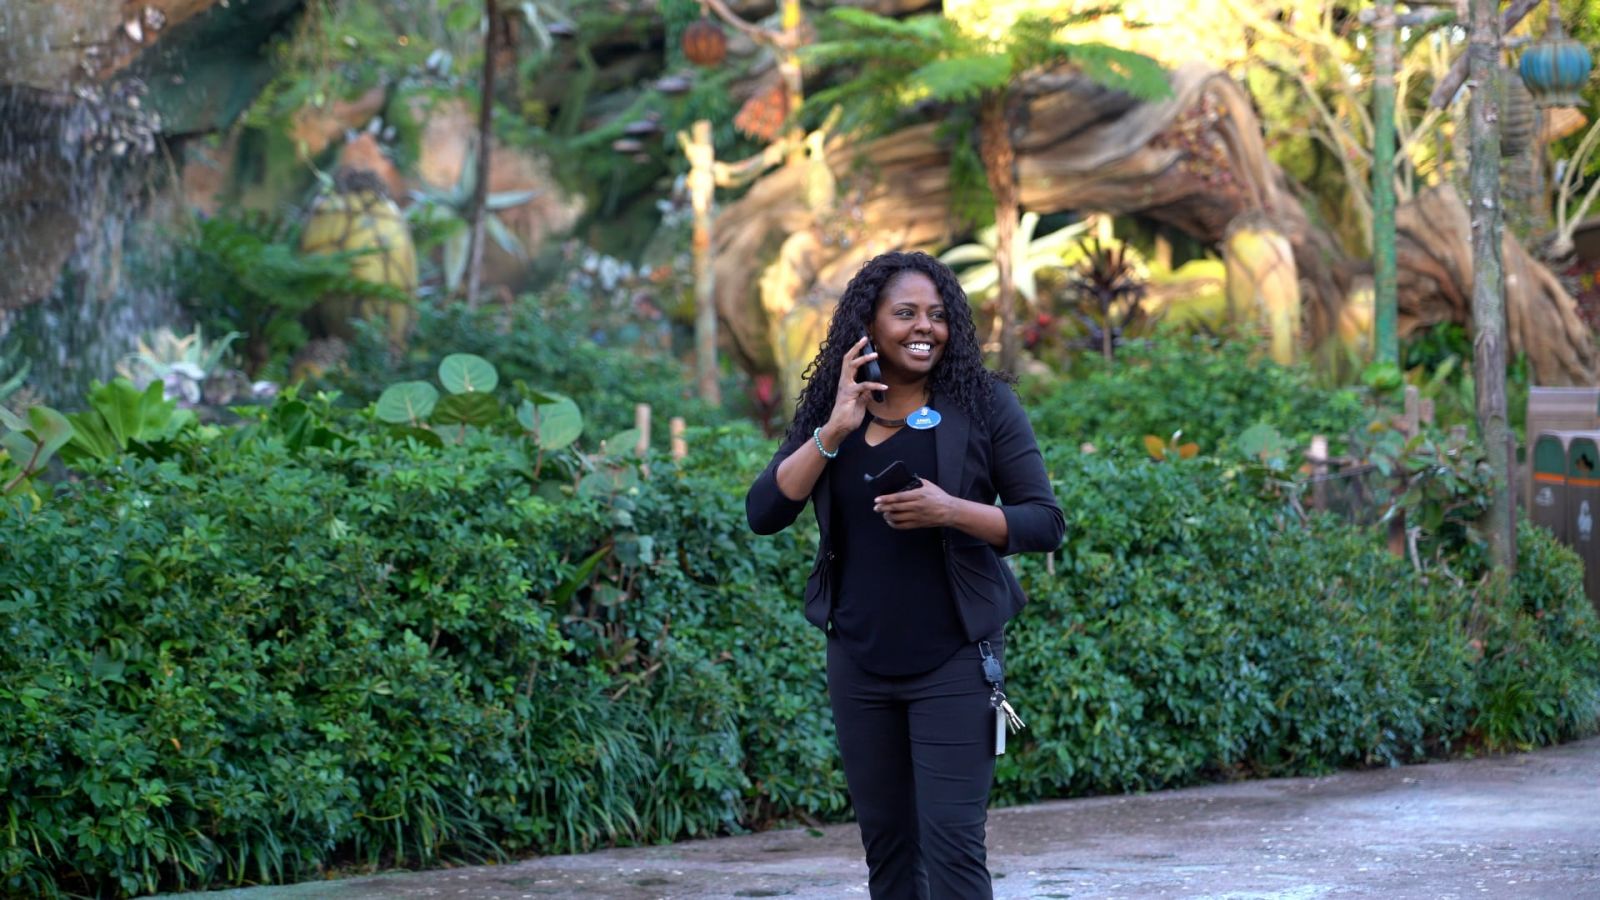 On call 24/7, Angel stays on top of every issue at Animal Kingdom to help "keep the magic alive" for park guests. (Purdue University photo/Jared Pike) (To download, see Media Kit Resources below.)